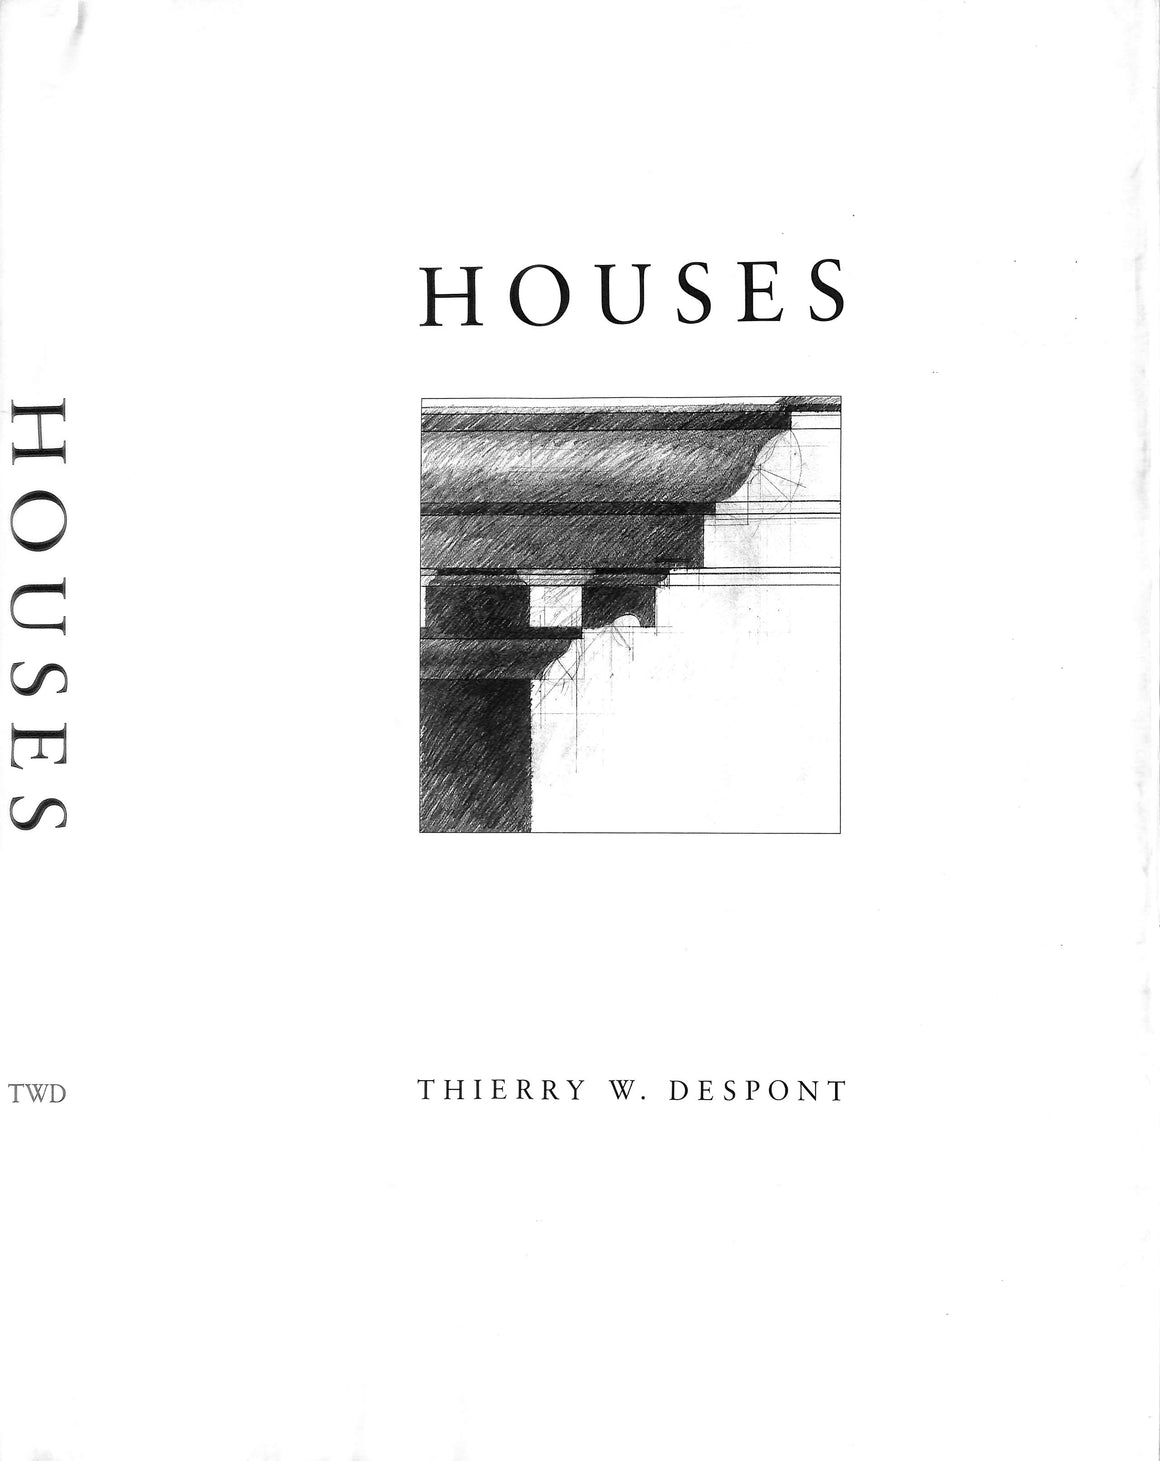 "Houses" 1990 DESPONT, Thierry